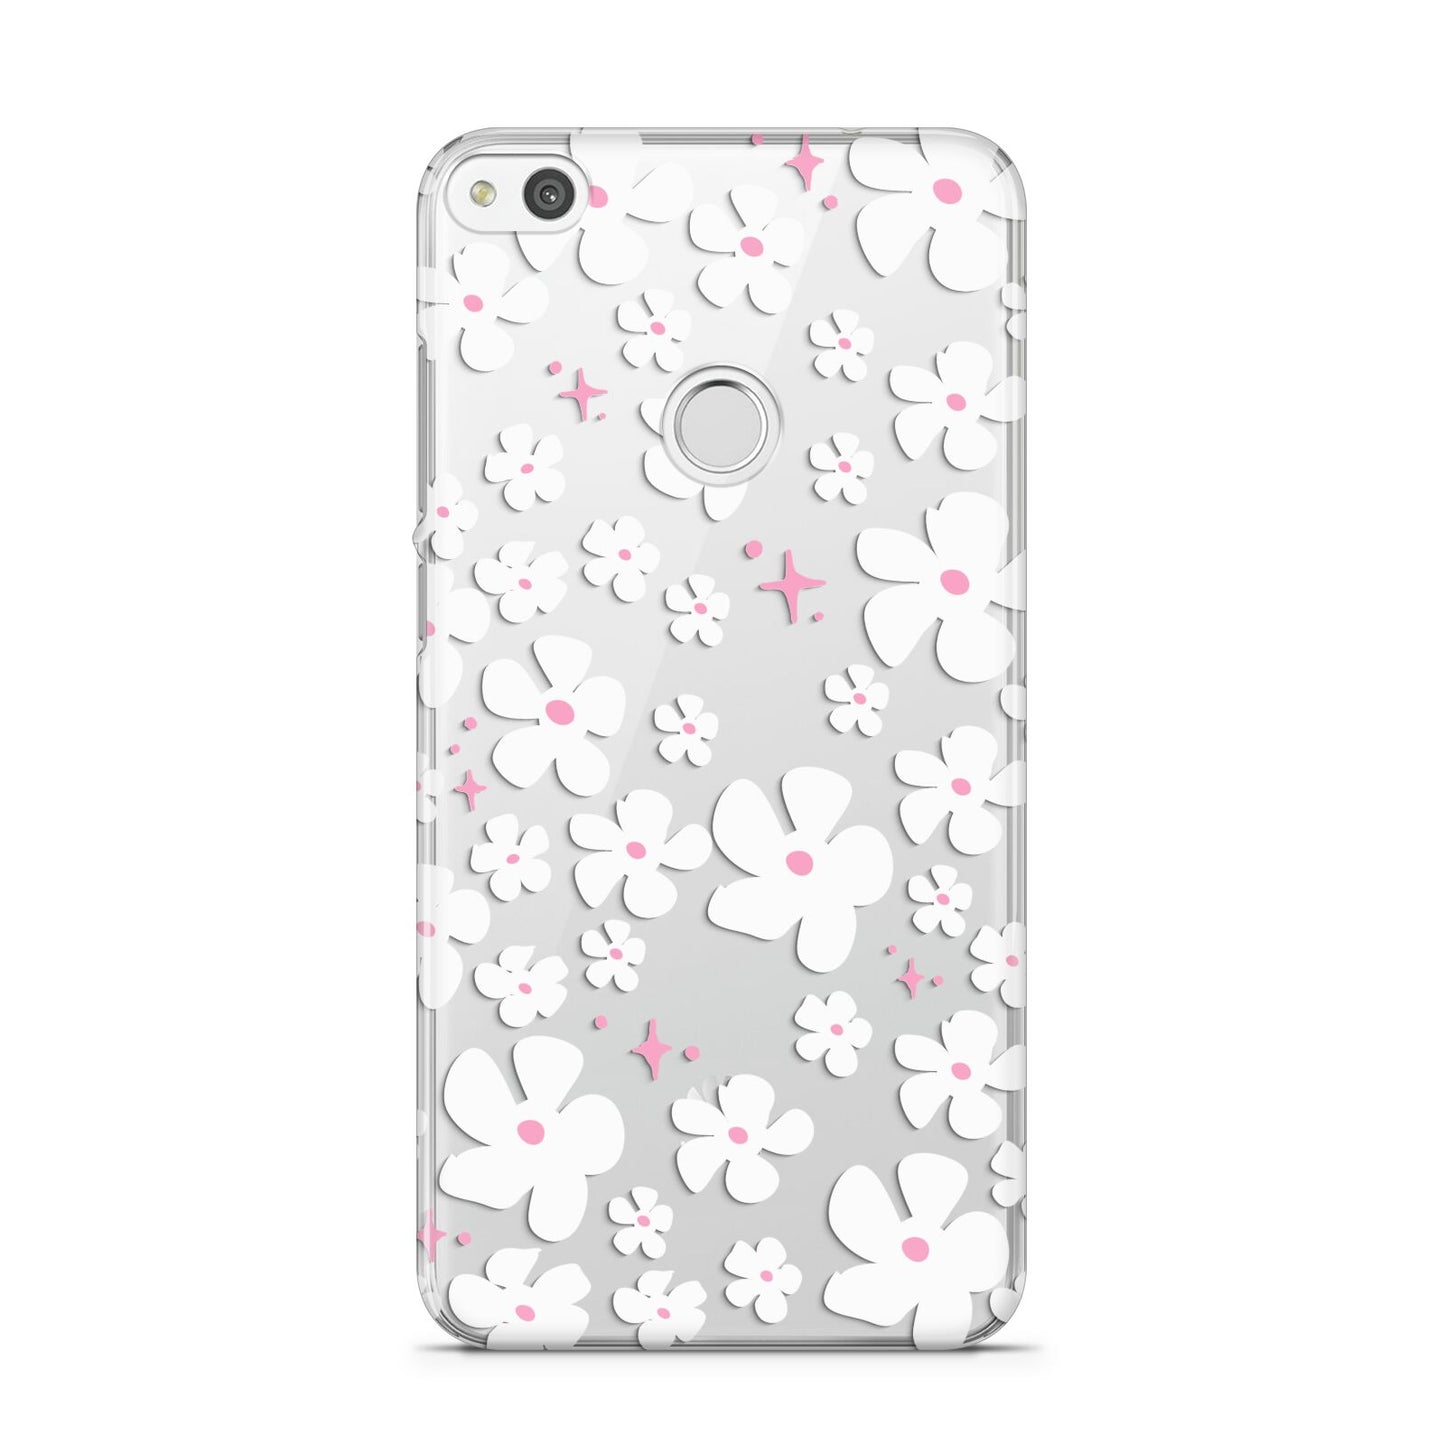 Abstract Daisy Huawei P8 Lite Case